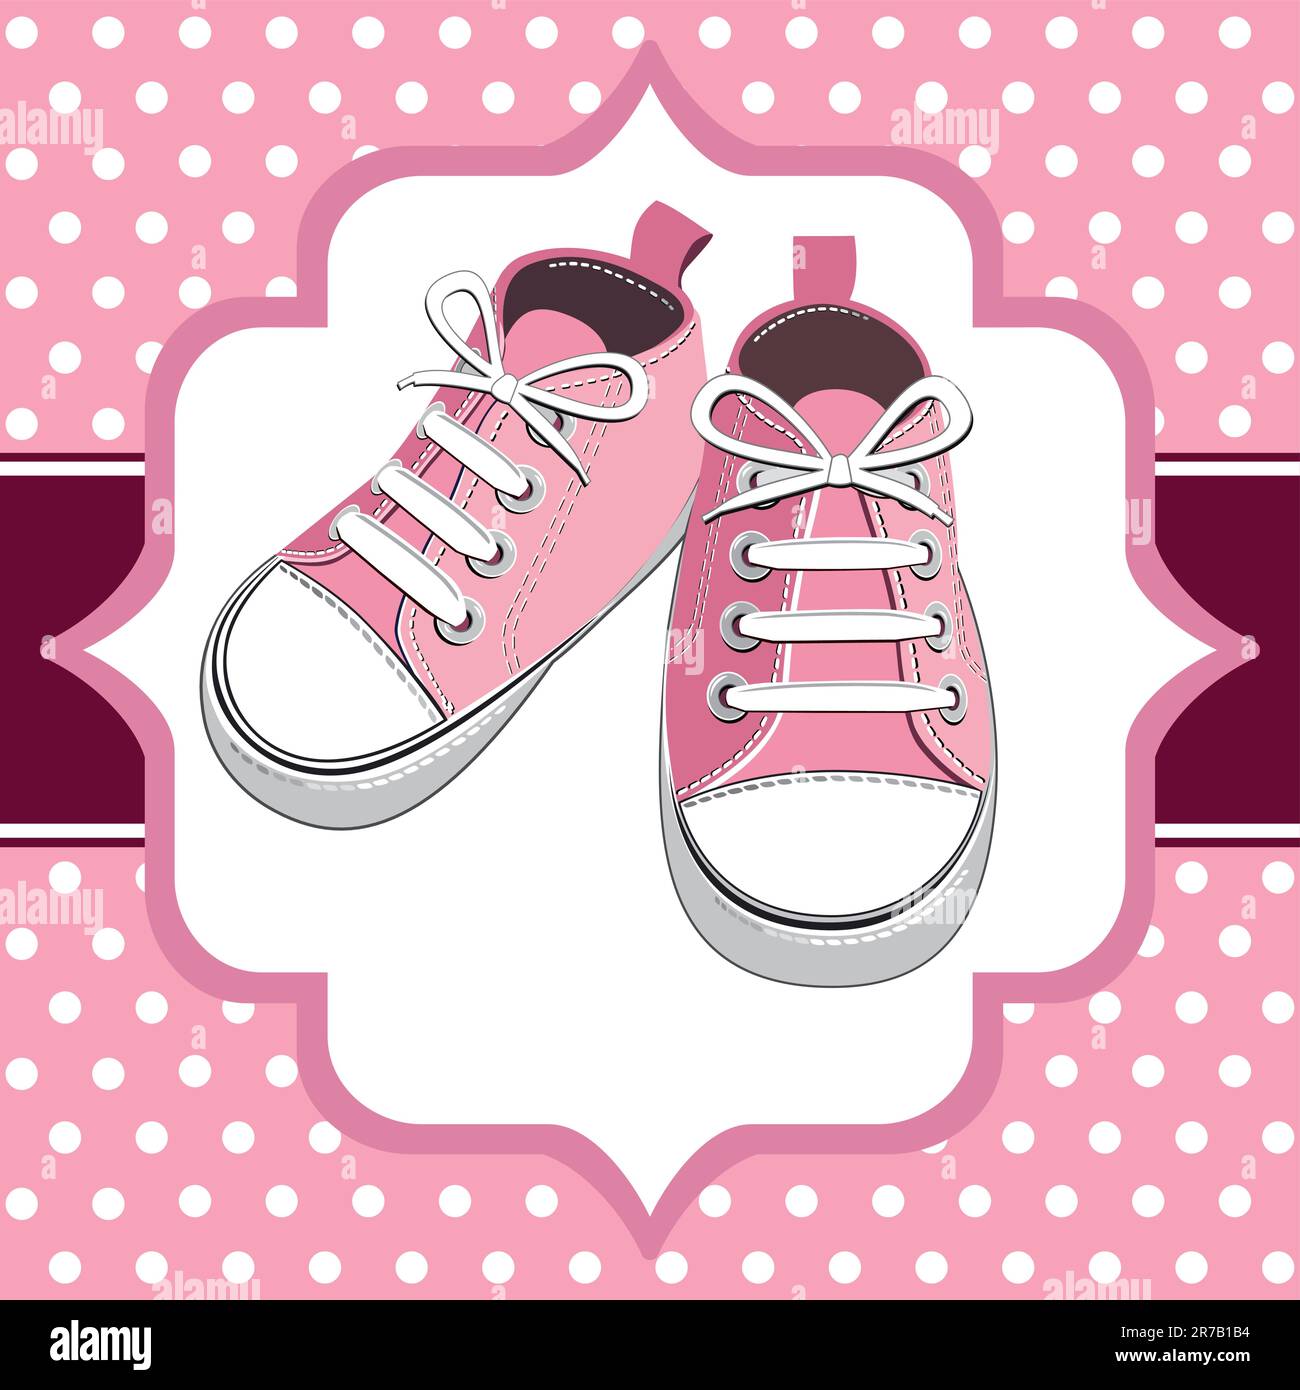 Pink shoes on a polka dot background, childrens or young adult shoes, pair kids sneaker. Stock Vector